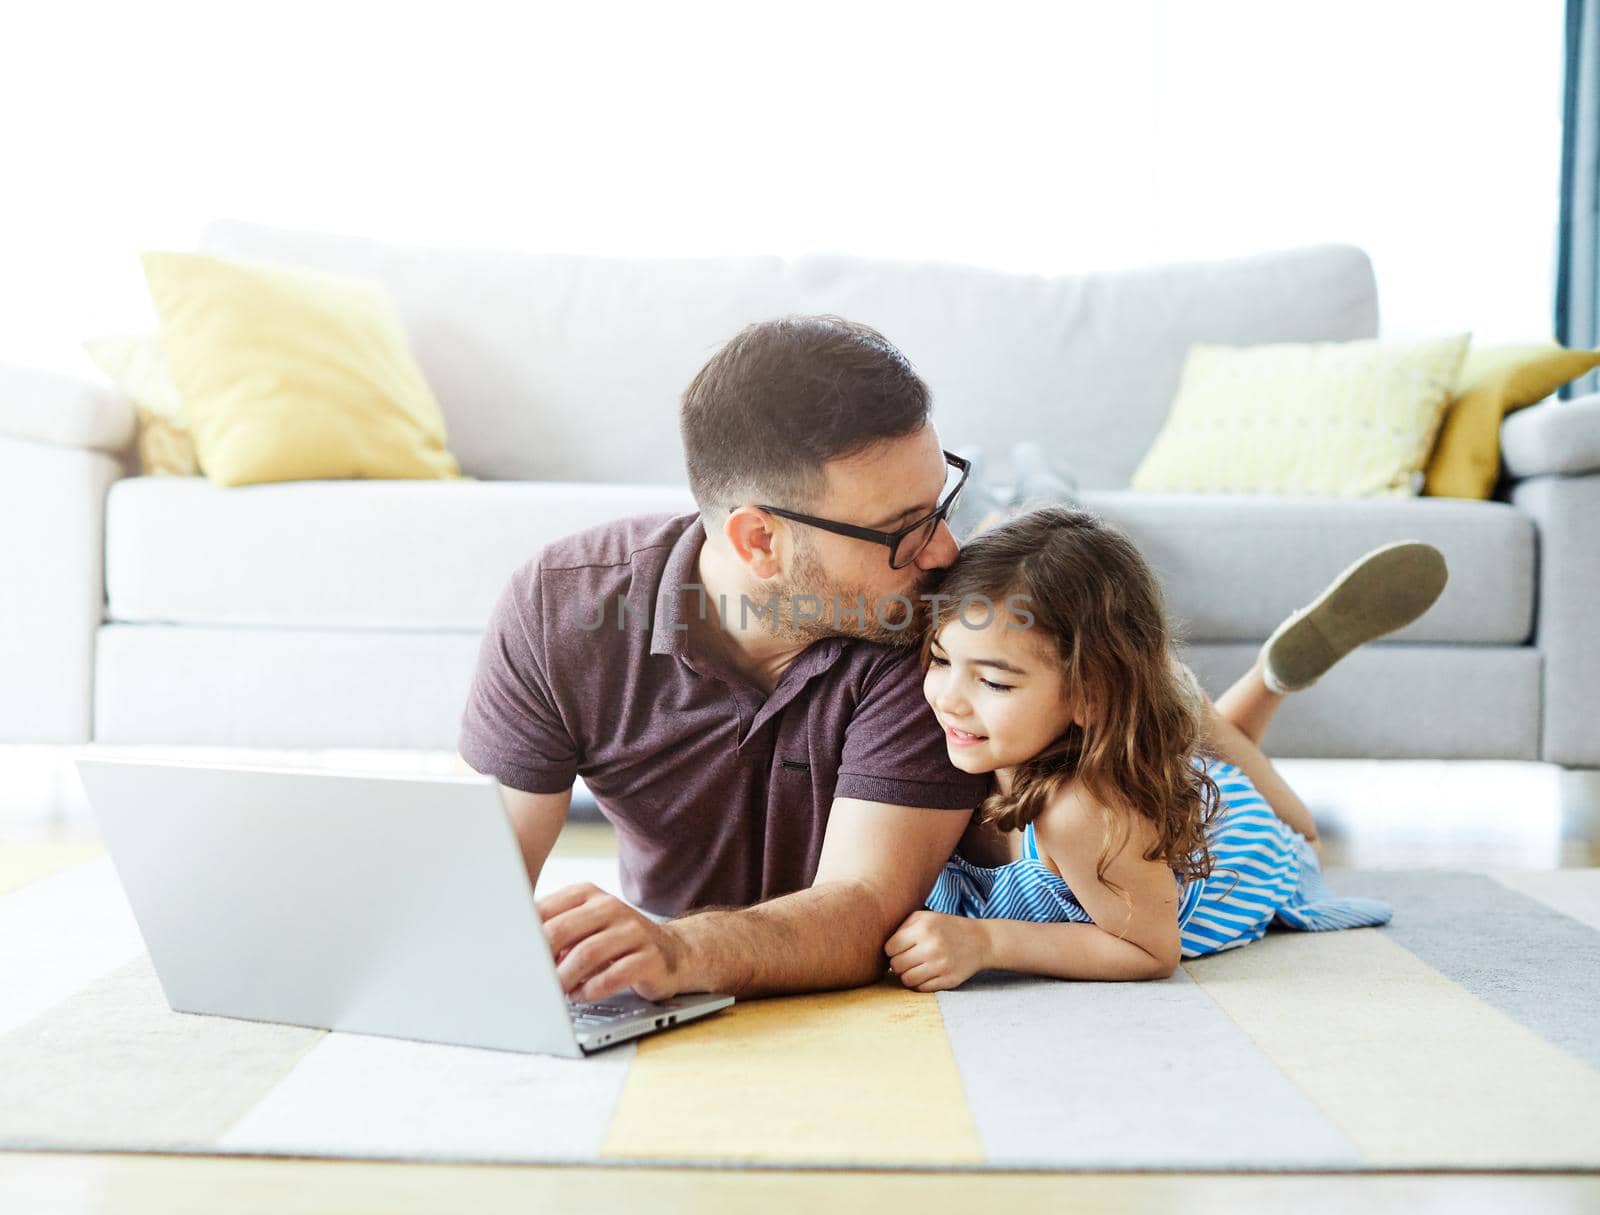 father and daughter using laptop lying down on the floor in the living room